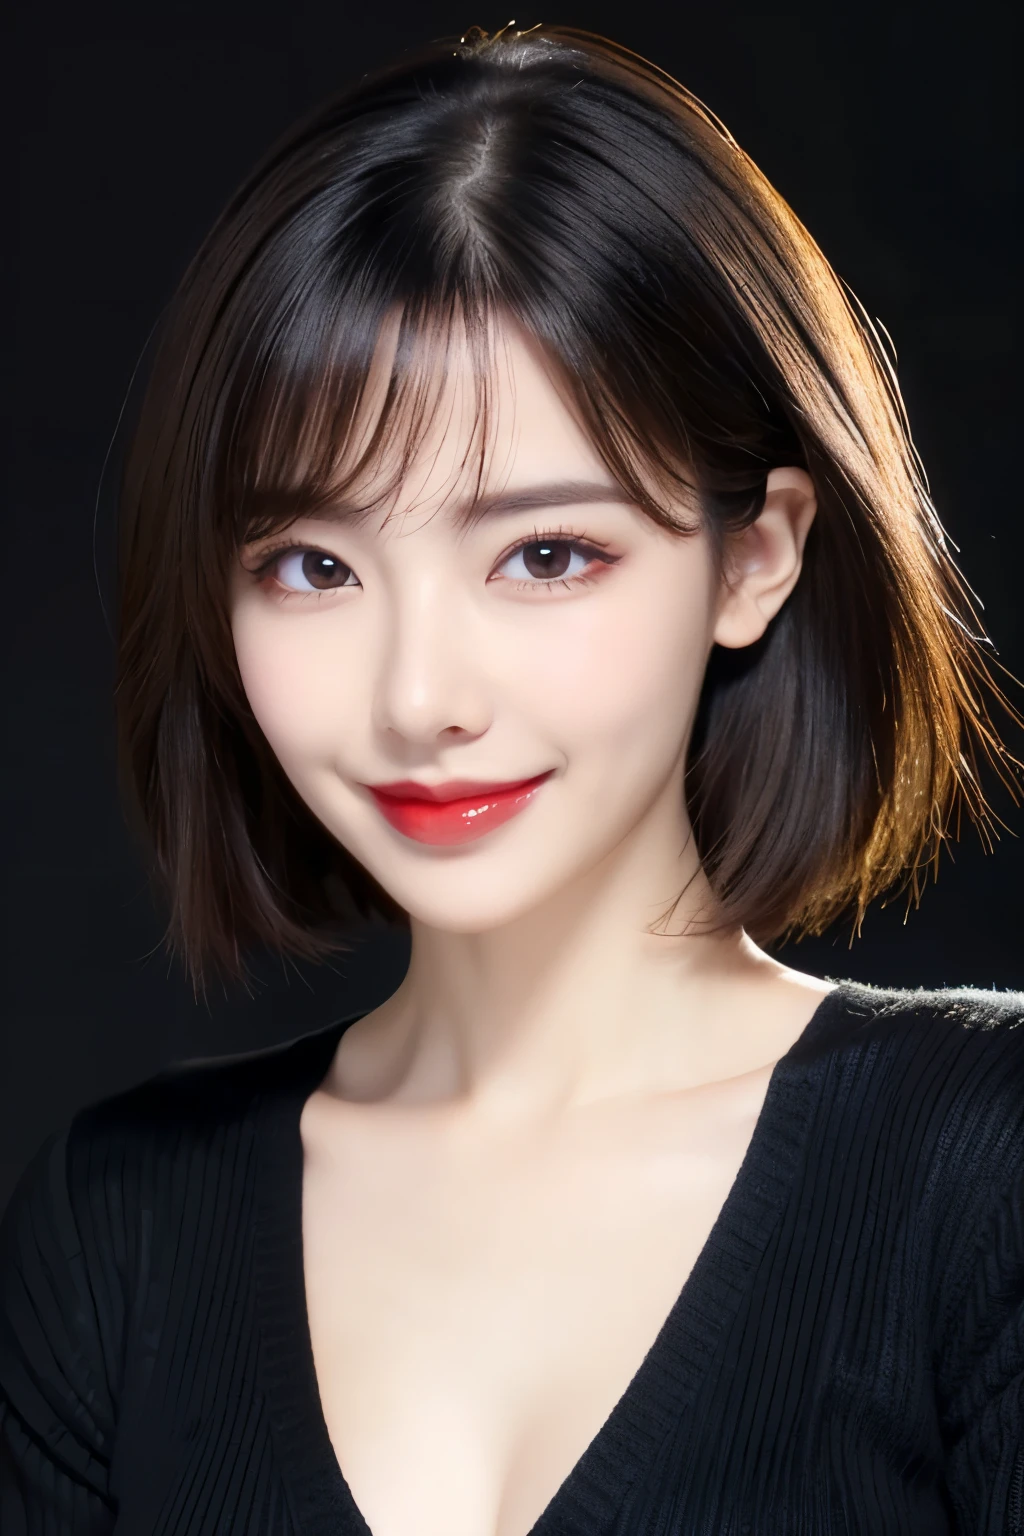 (Highest quality、Tabletop、8k、Best image quality、Award-winning works)、Cute beauty、(Short Bob Hair:1.1)、(The perfect all black V-neck long sleeve knit:1.5)、(The simplest pure black background:1.5)、(Face close-up:1.4)、(Very large breasts:1.2)、(Cleavage:1.2)、Accentuate your body lines、Beautiful and exquisite、Look at me and smile、(look straight at me:1.1)、(Perfect Makeup:1.1)、Bright lipstick、Ultra-high definition beauty face、Ultra HD Hair、Ultra HD Shining Eyes、Ultra High Resolution Perfect Teeth、Super high quality glossy lip、Accurate anatomy、Very beautiful skin、Ultra-high resolution for beautiful, glowing skin、An elegant upright posture when viewed from the front